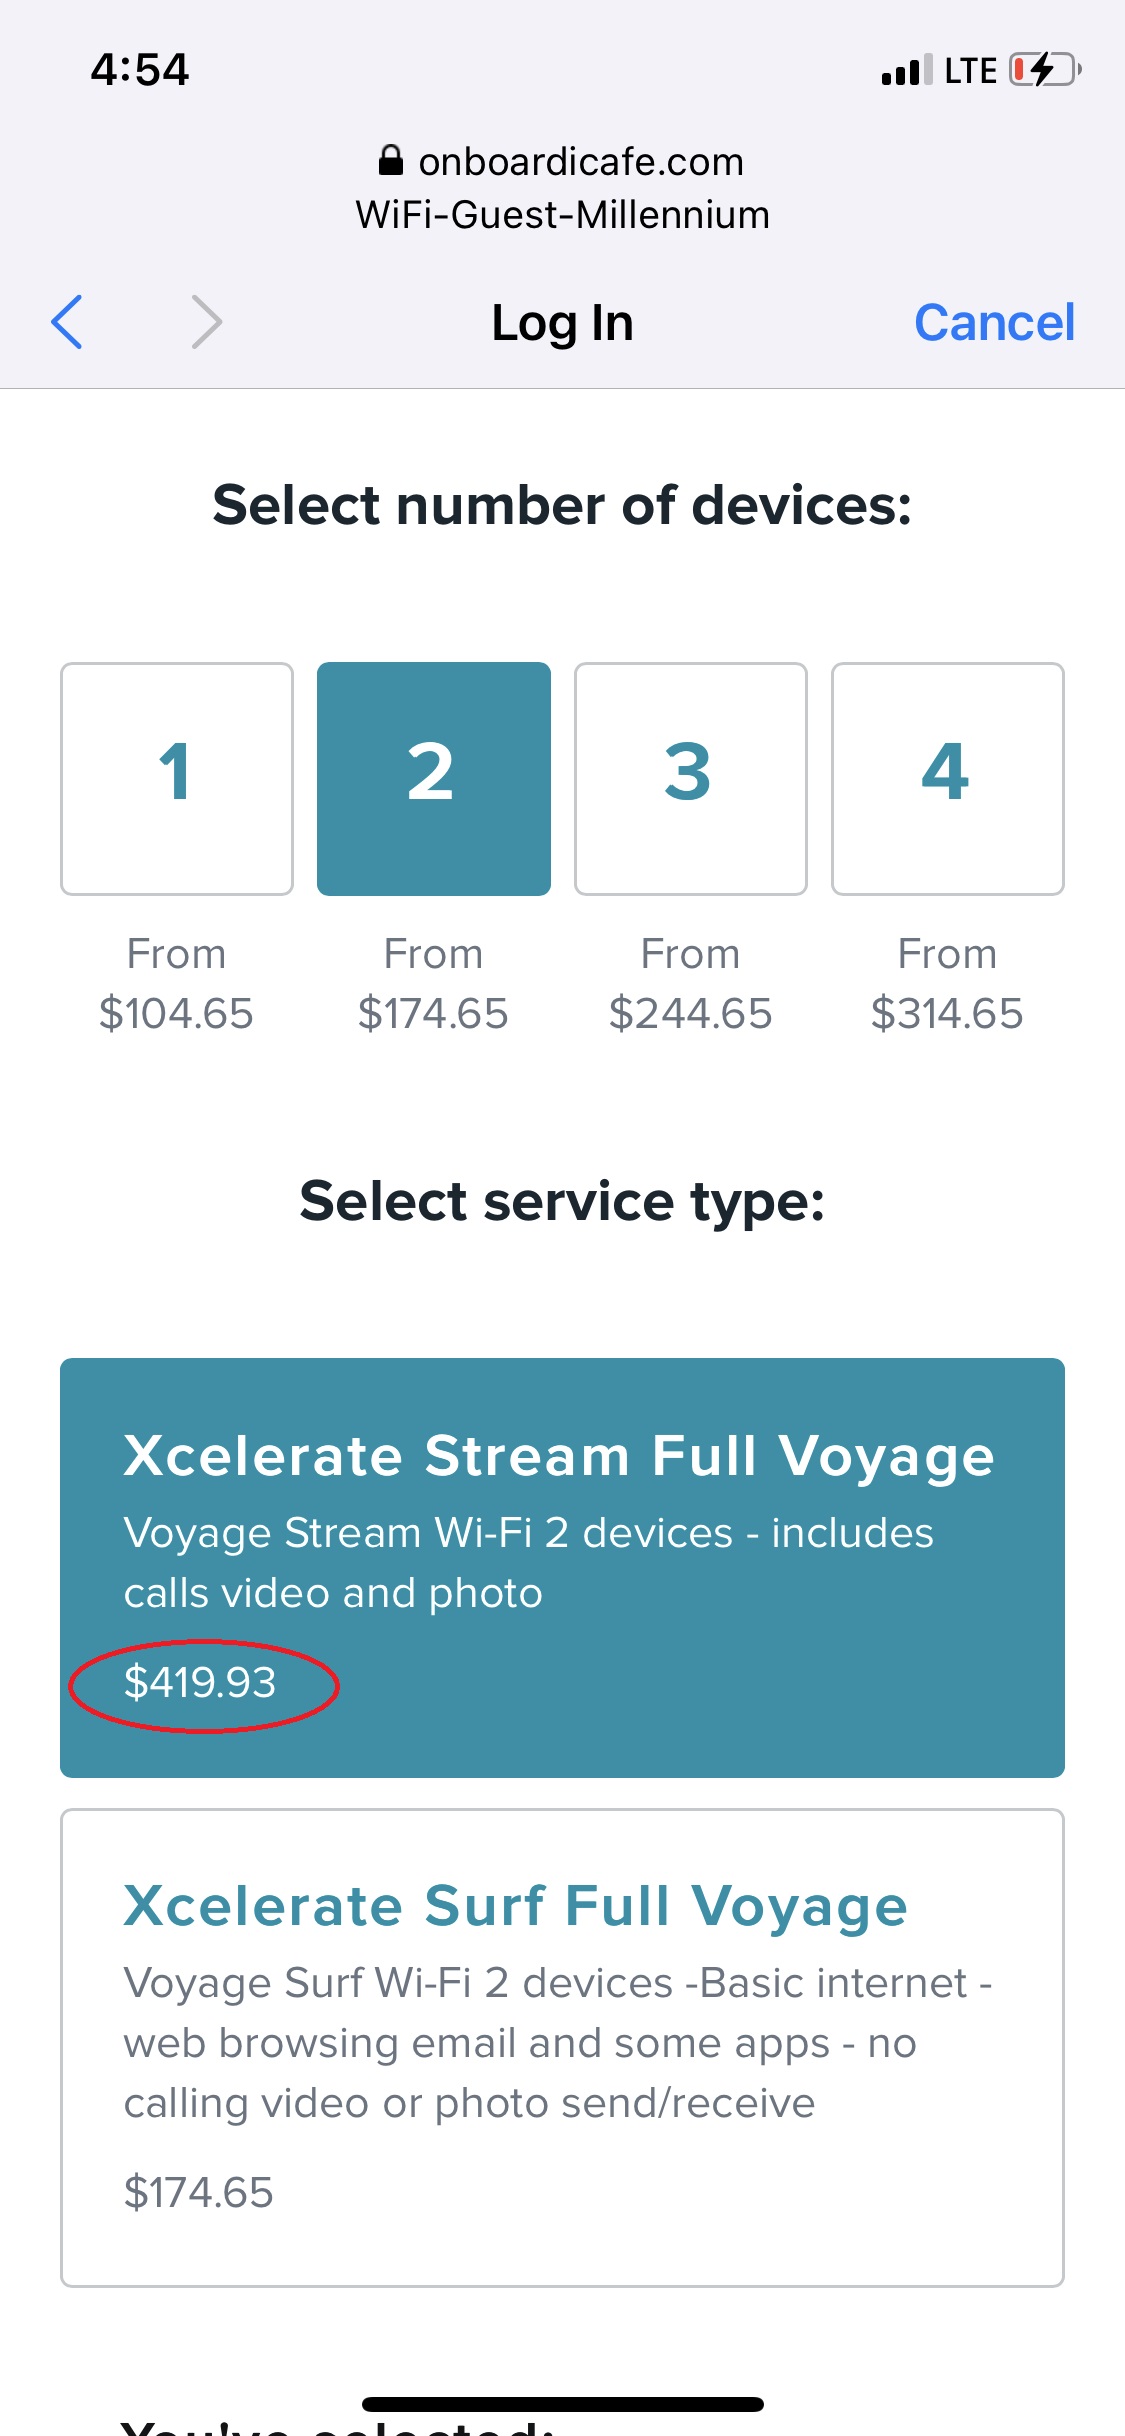 A two-device streaming Wi-Fi package would cost more than $400 during this seven-night sailing.